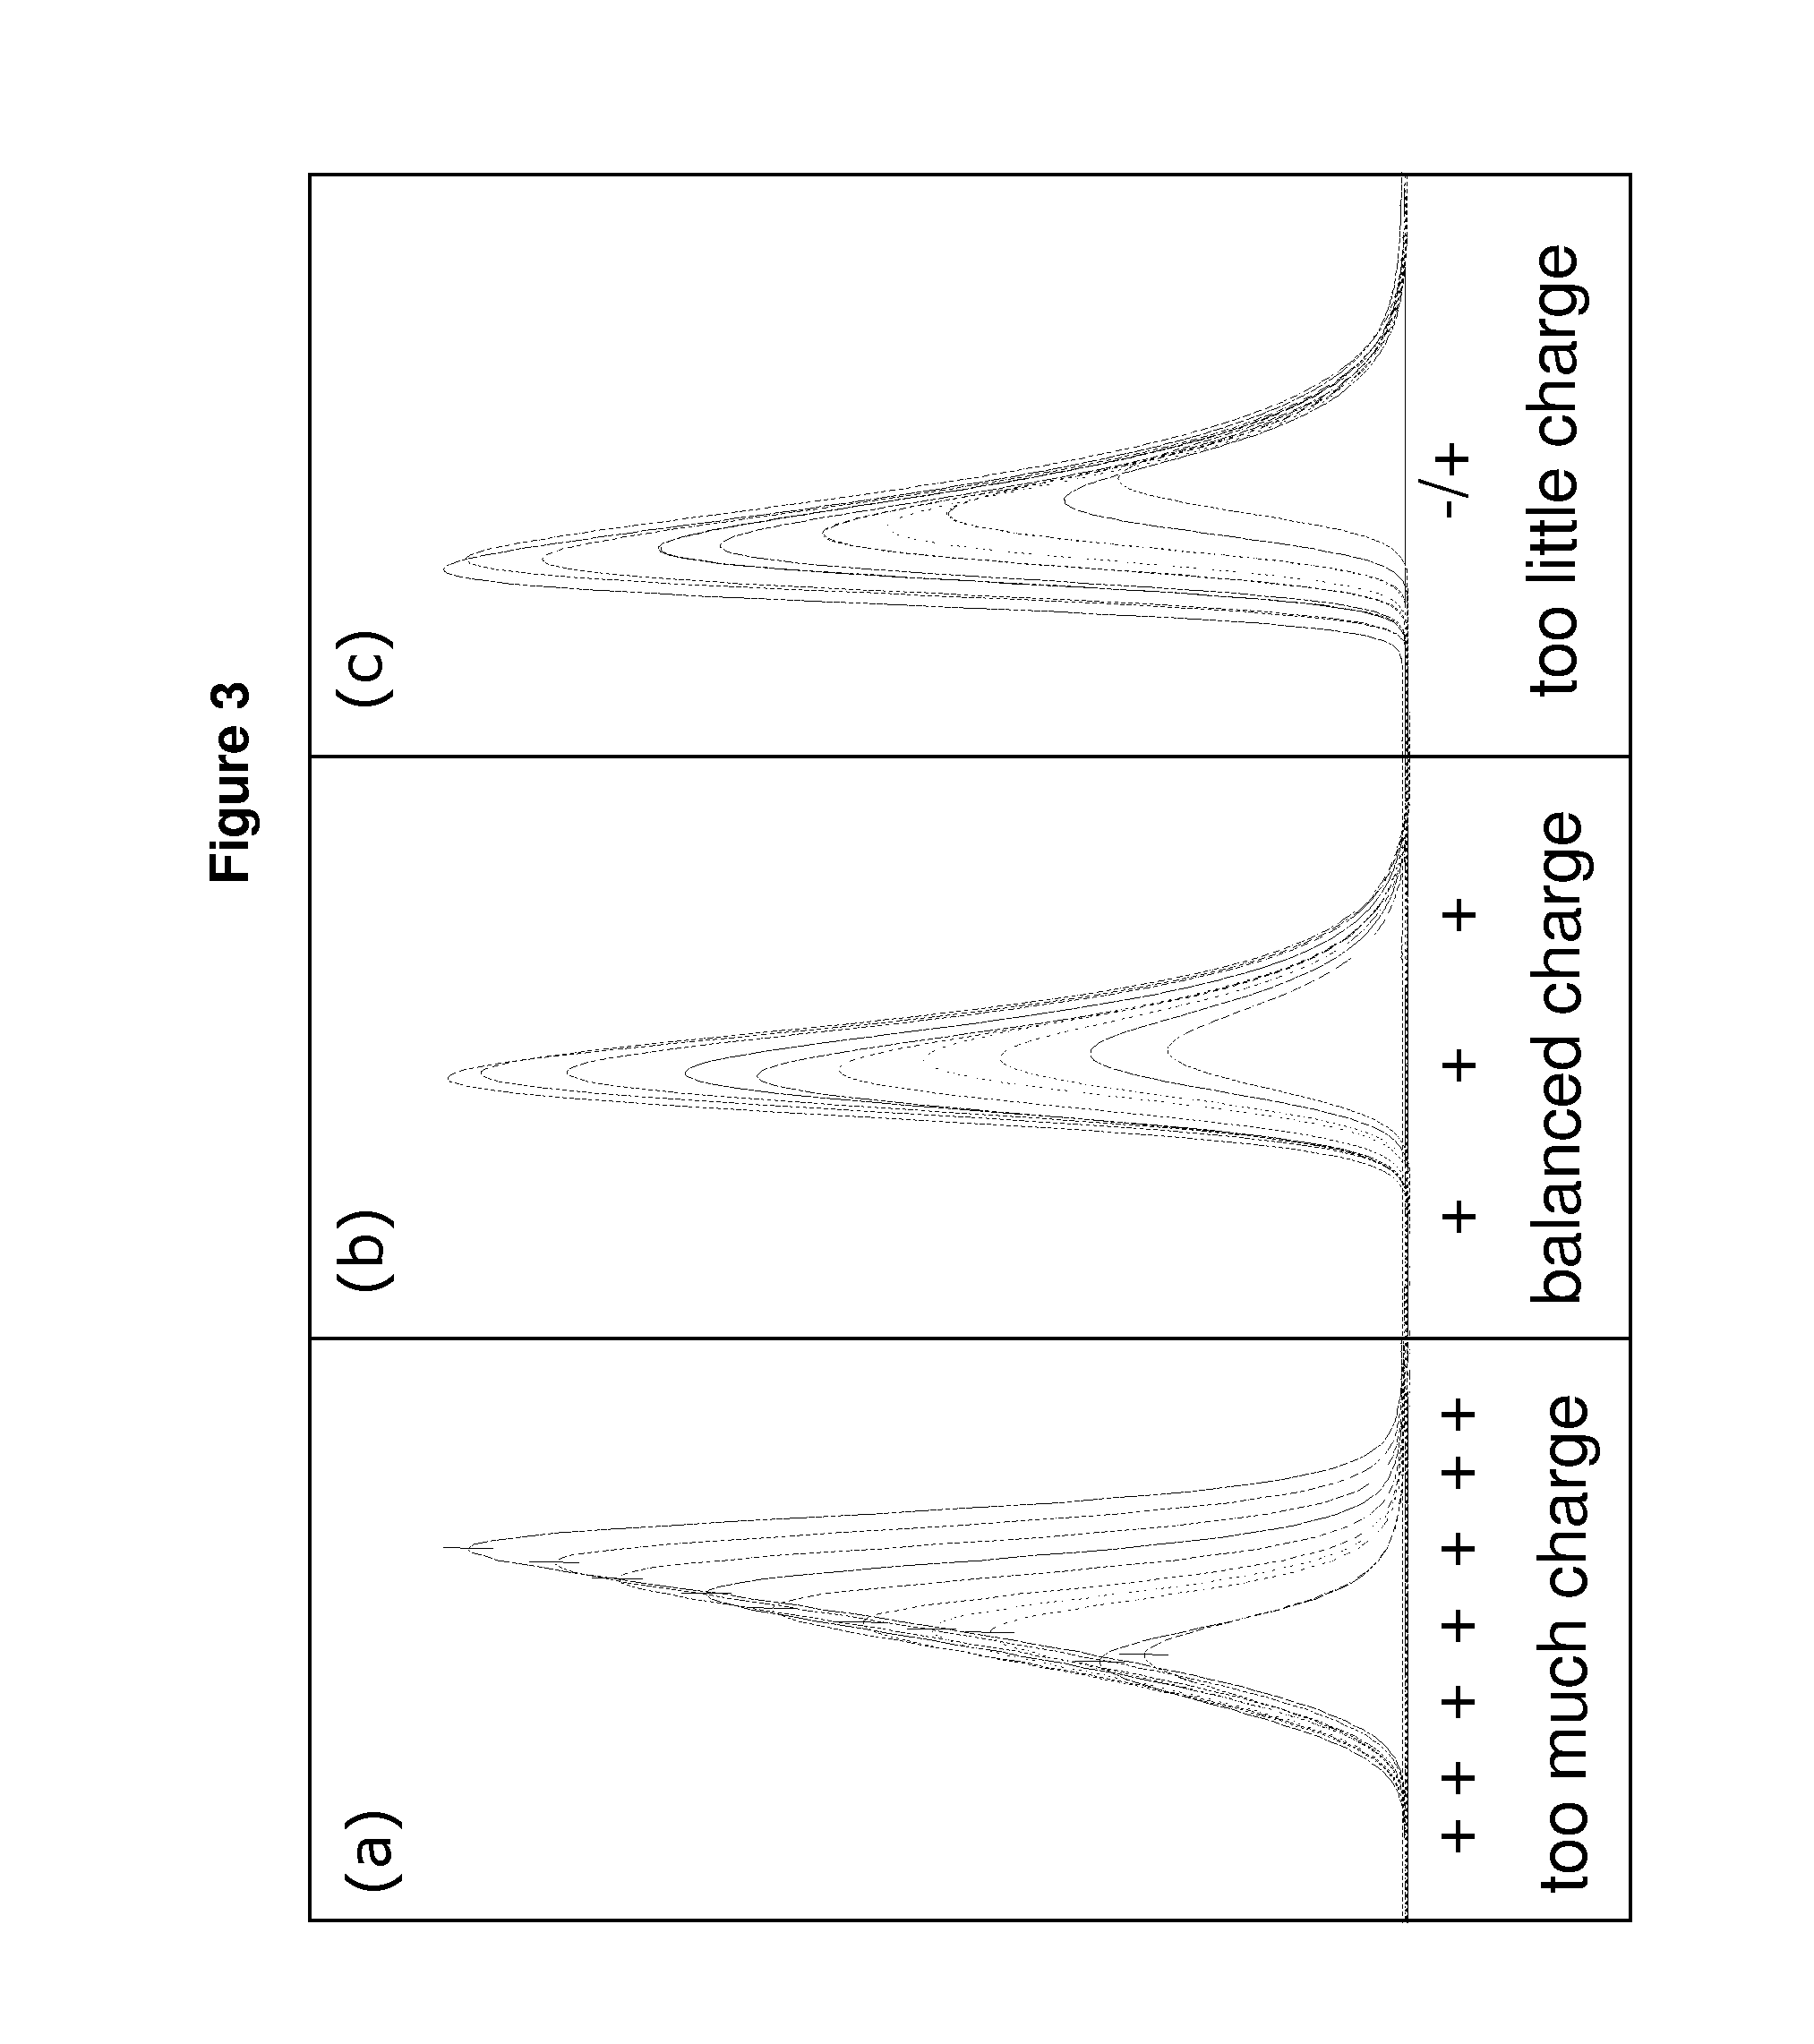 High purity chromatographic materials comprising an ionizable modifier